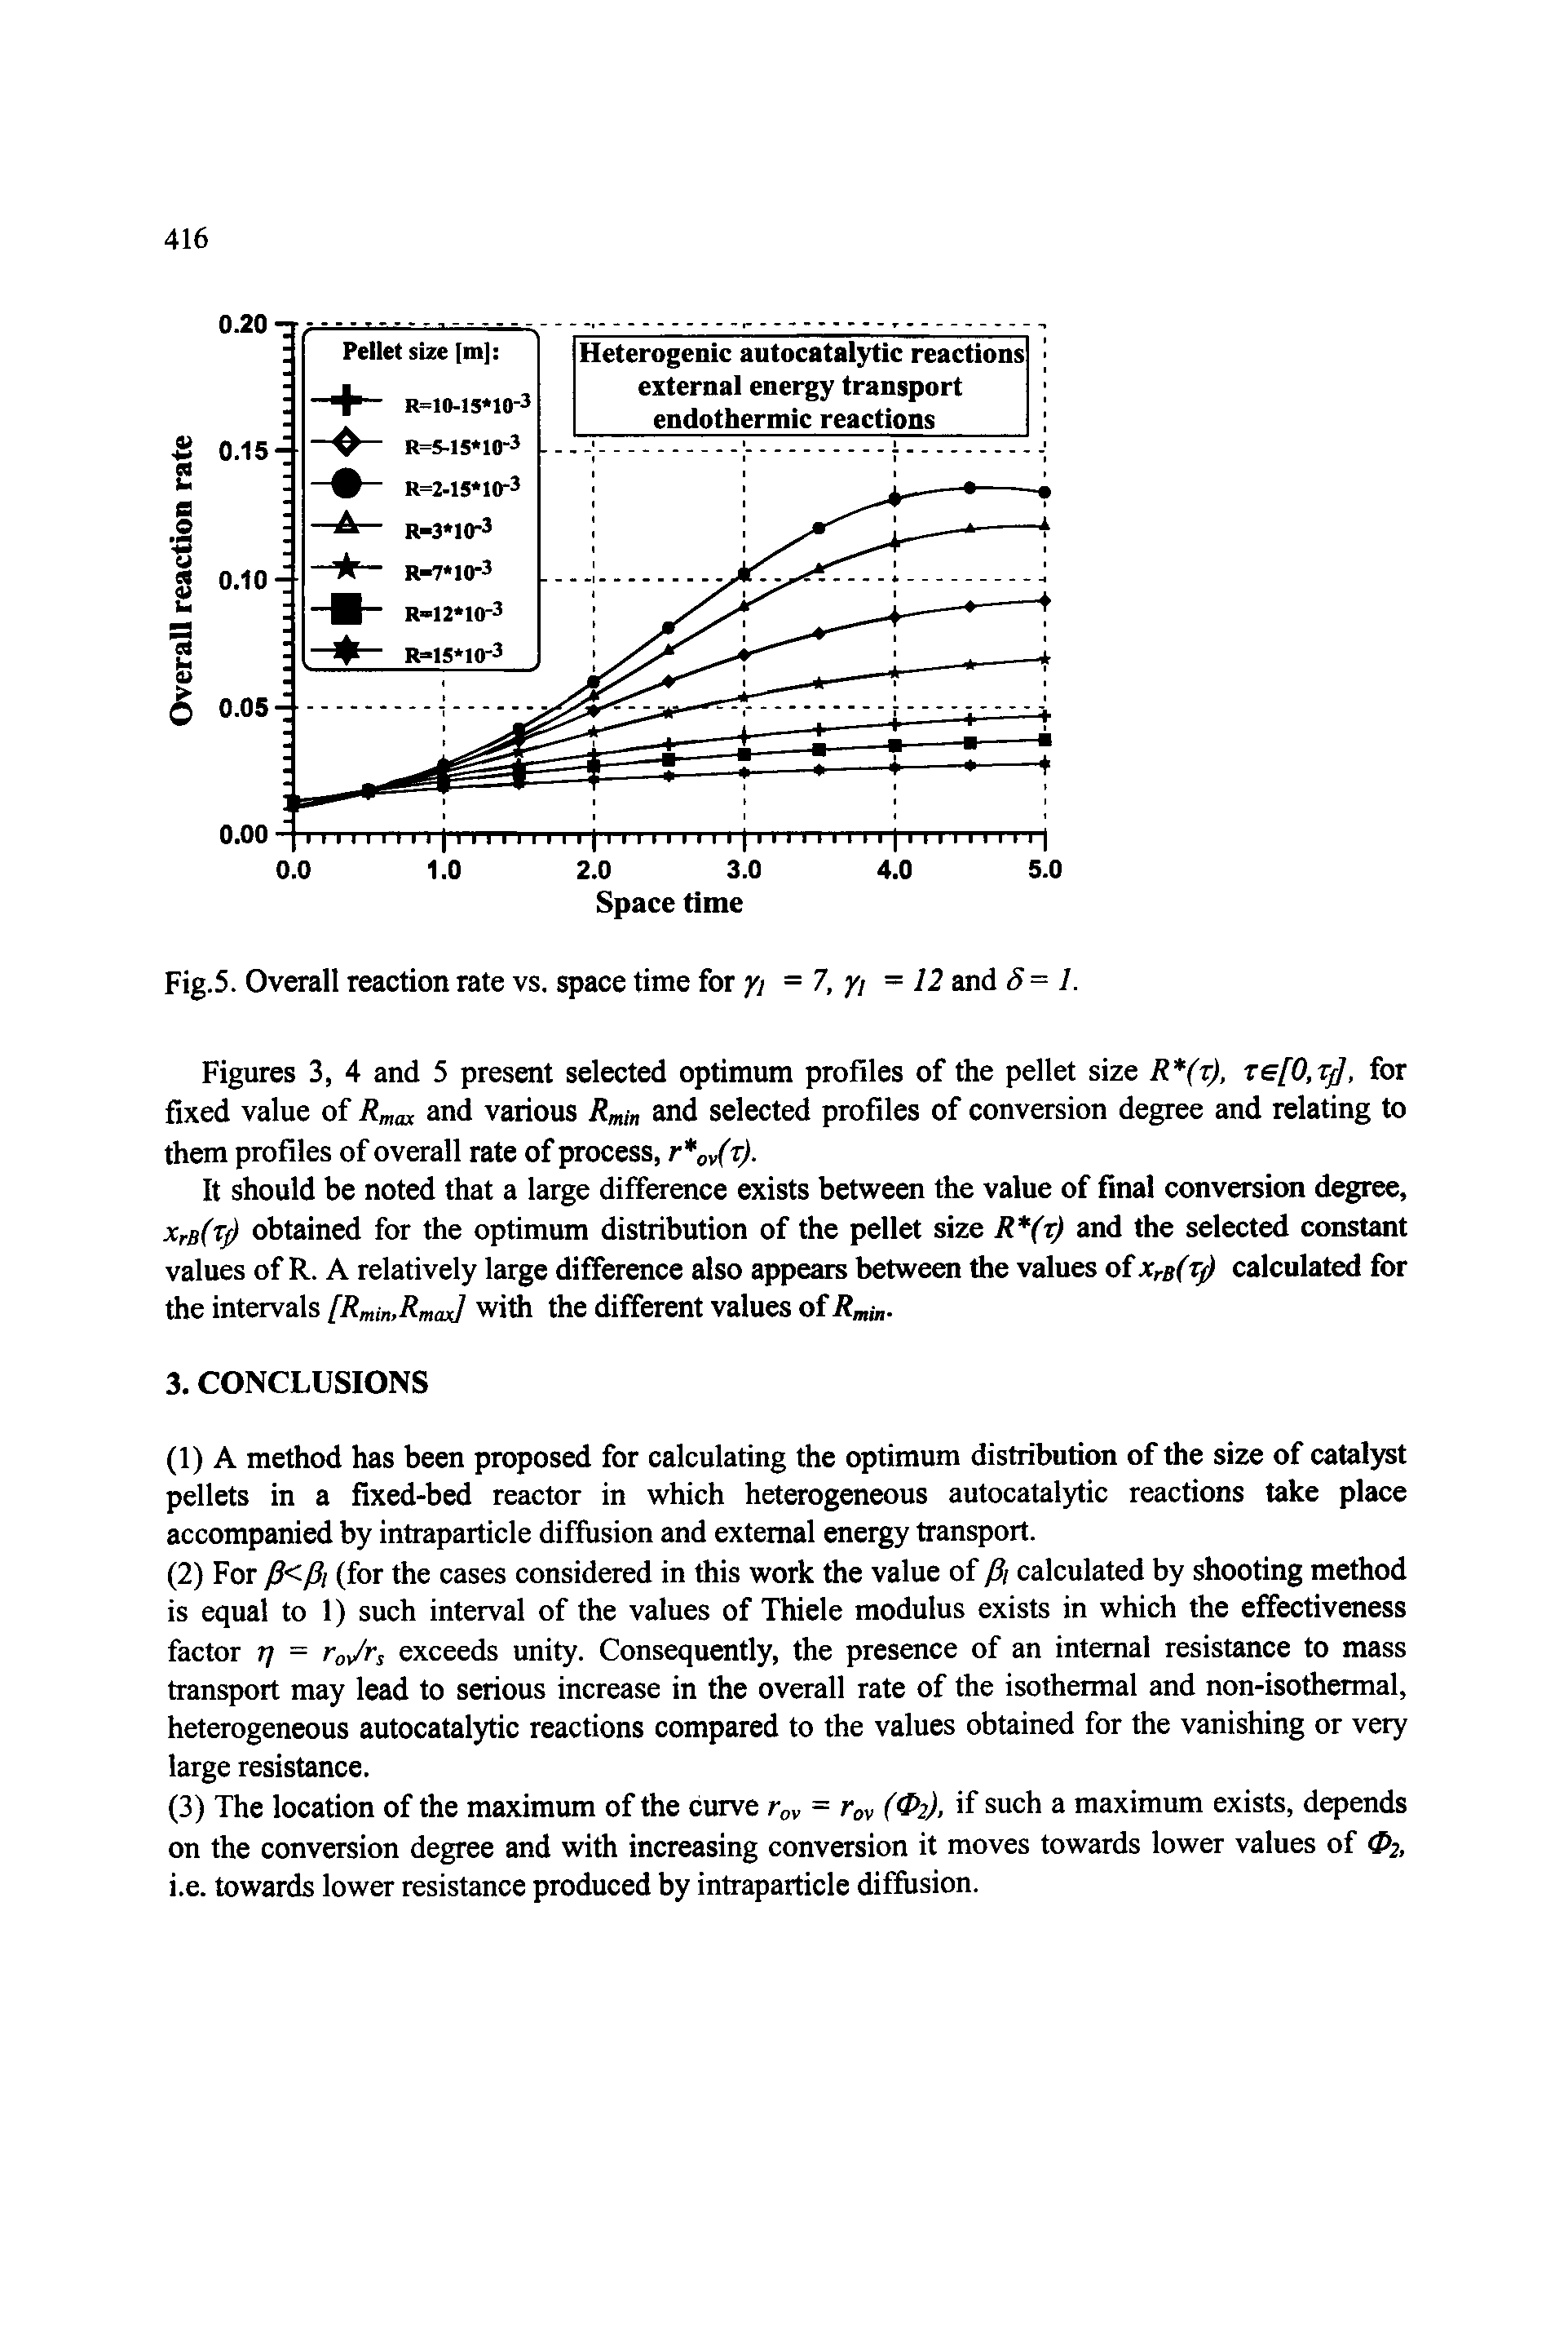 Figures 3, 4 and 5 present selected optimum profiles of the pellet size R (r), te[0,T, for fixed value of R ax and various R and selected profiles of conversion degree and relating to them profiles of overall rate of process, r T).